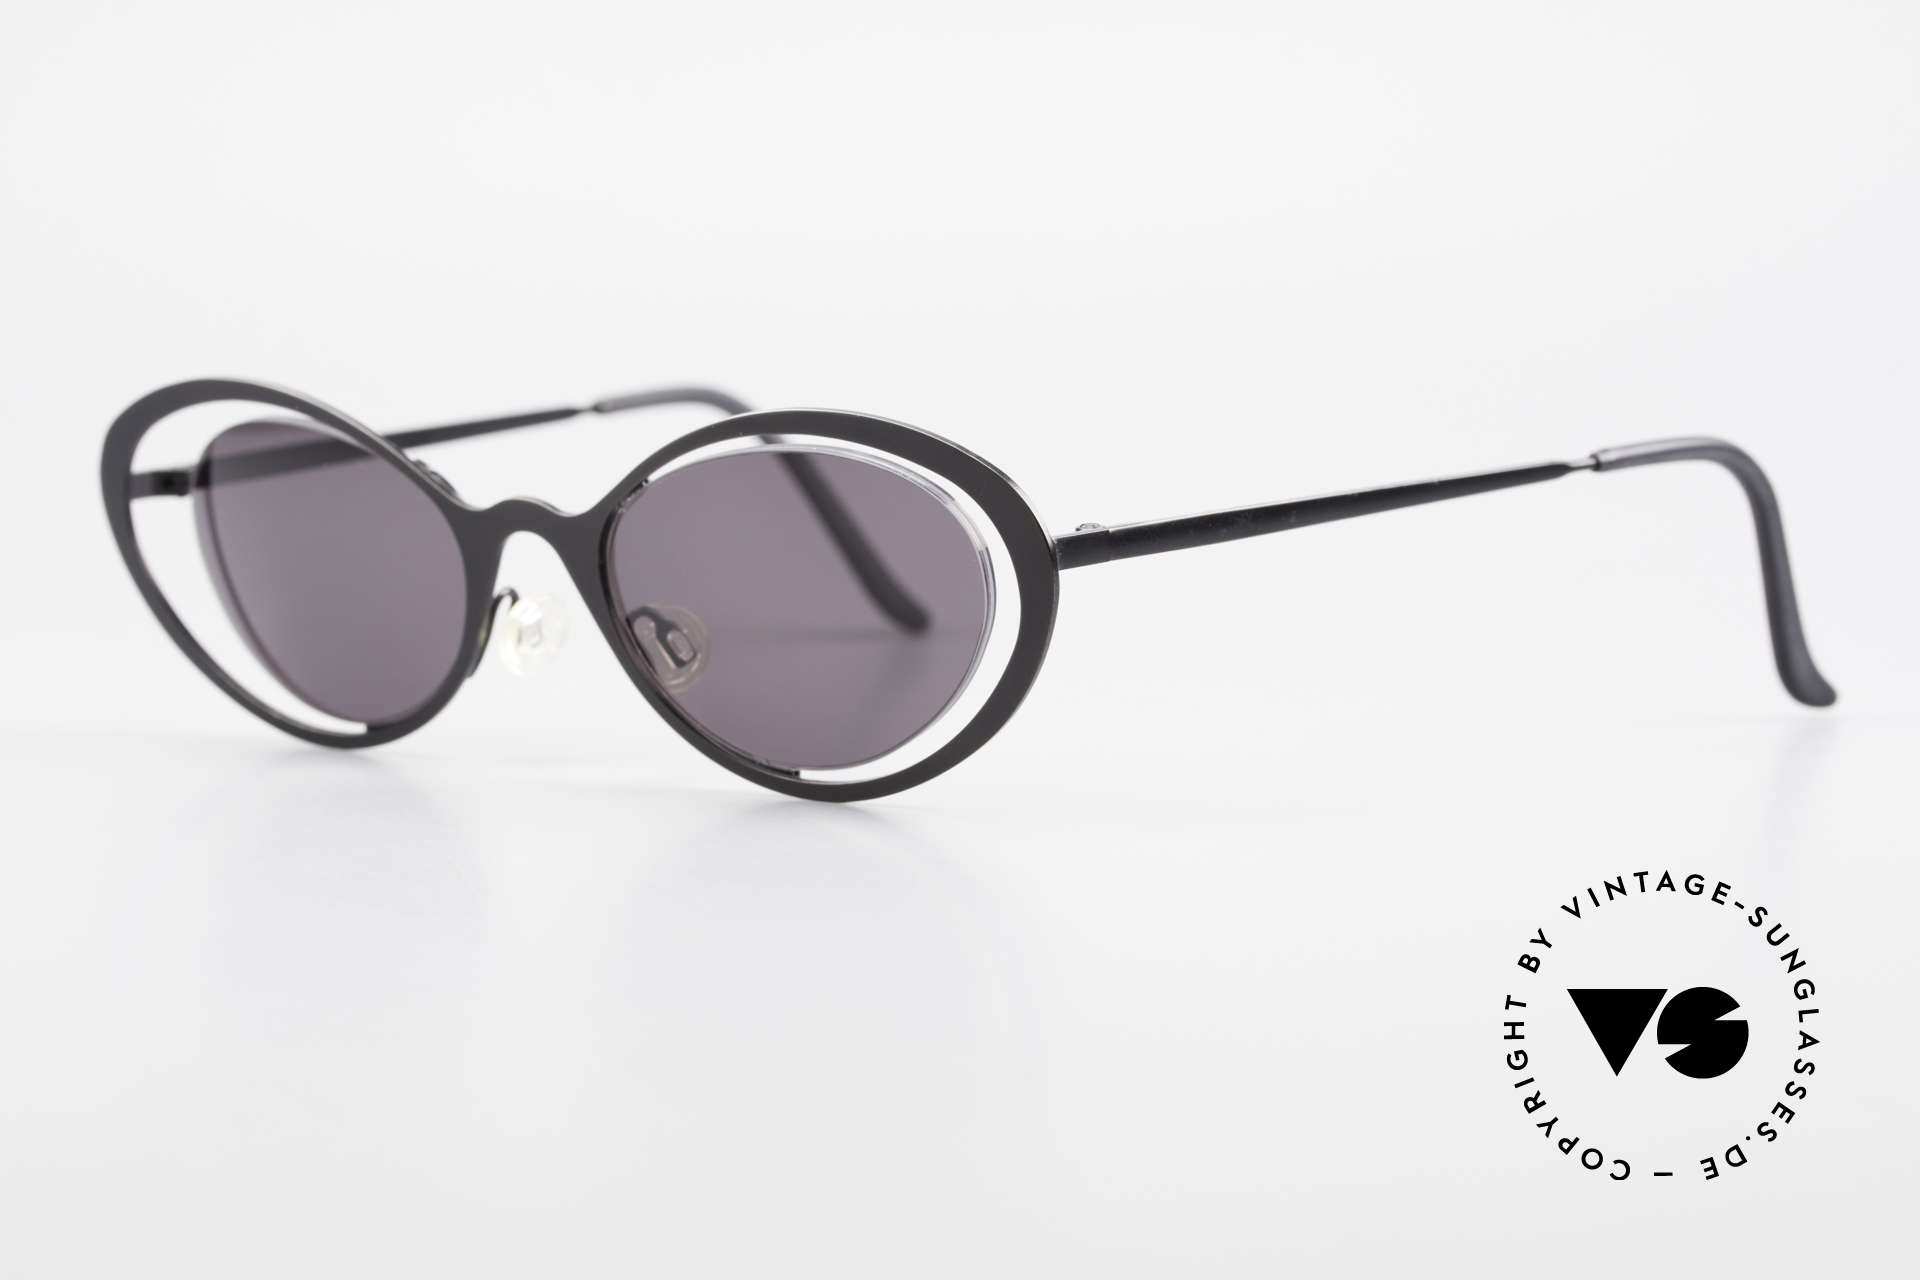 Theo Belgium LuLu Rimless Cateye Sunglasses 90s, lenses are fixed with a nylor thread (Cat's eye style), Made for Women